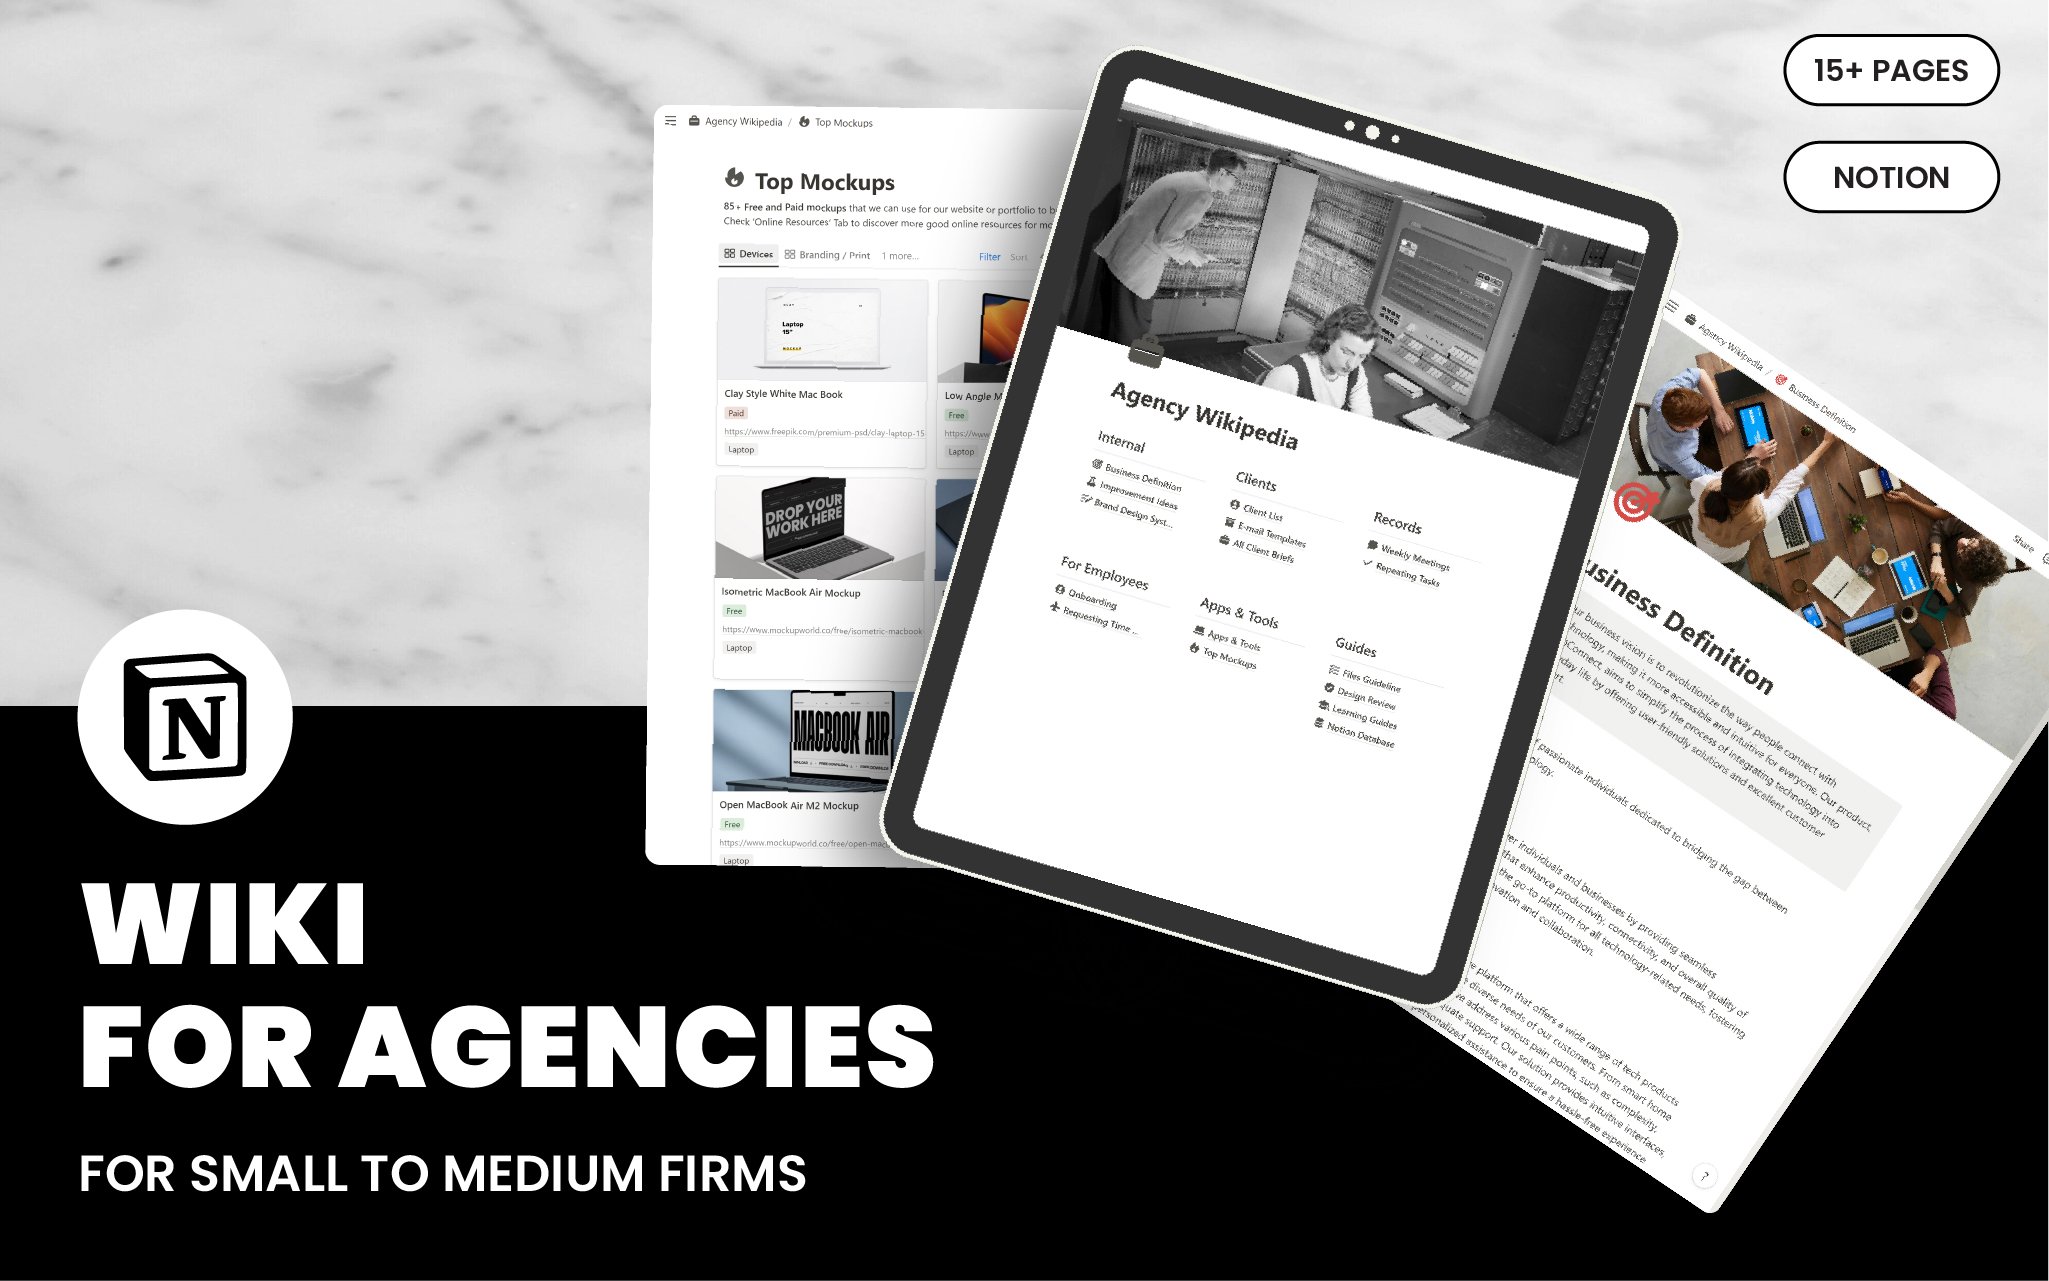 Streamline your business operations with our Template, designed for small to medium-sized firms. This all-in-one solution offers seamless management of client information, internal resources, project records, and team collaboration. Perfect for keeping your business organised.